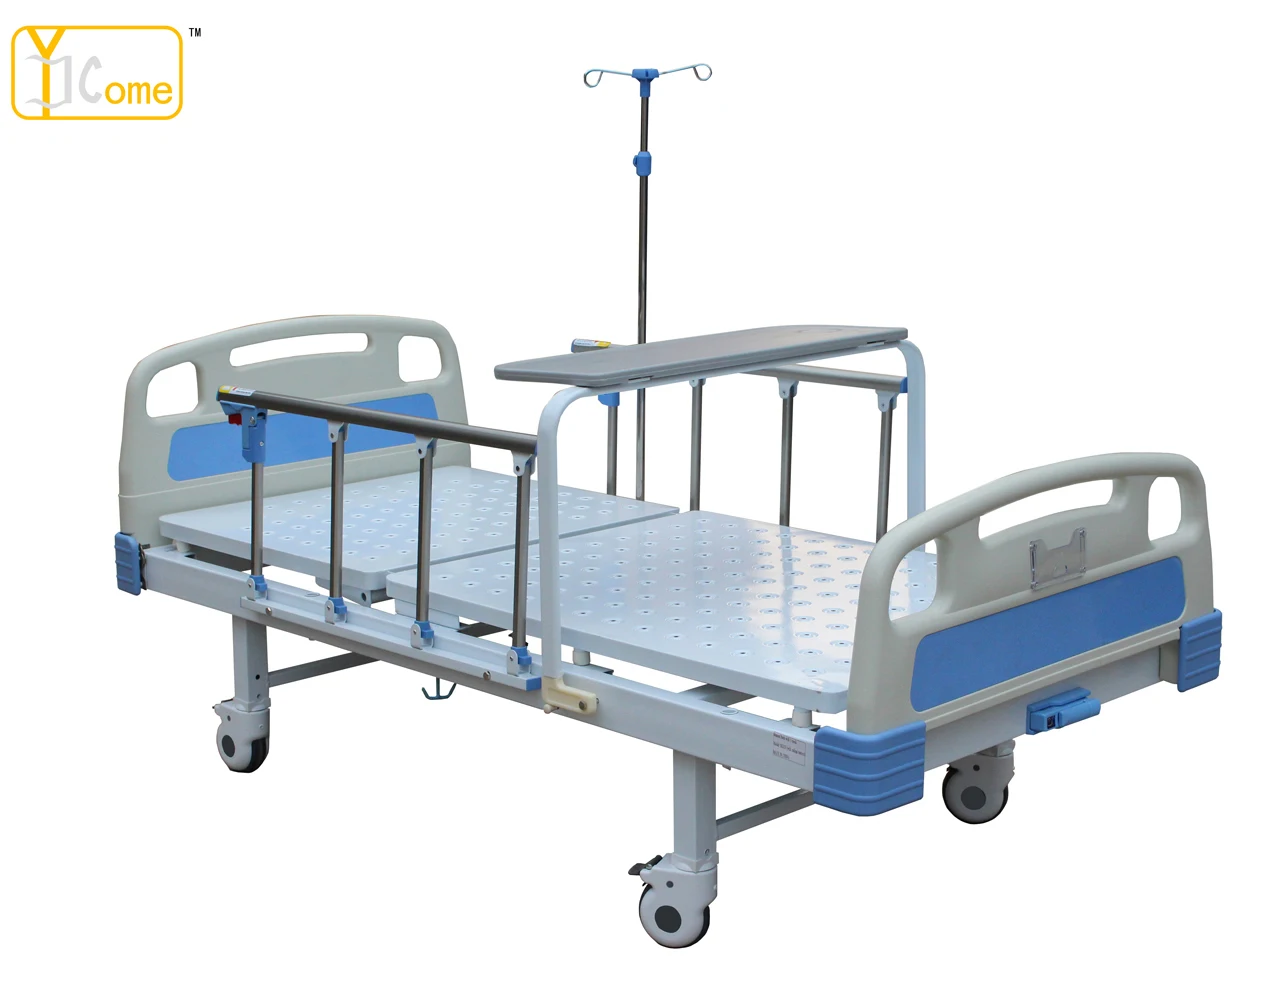 High Quality Multi Functions Electric Hospital Medical Bed/icu Bed - Buy  Icu Hospital Bed,Icu Bed Price,Icu Hospital Bed Price Product on Alibaba.com